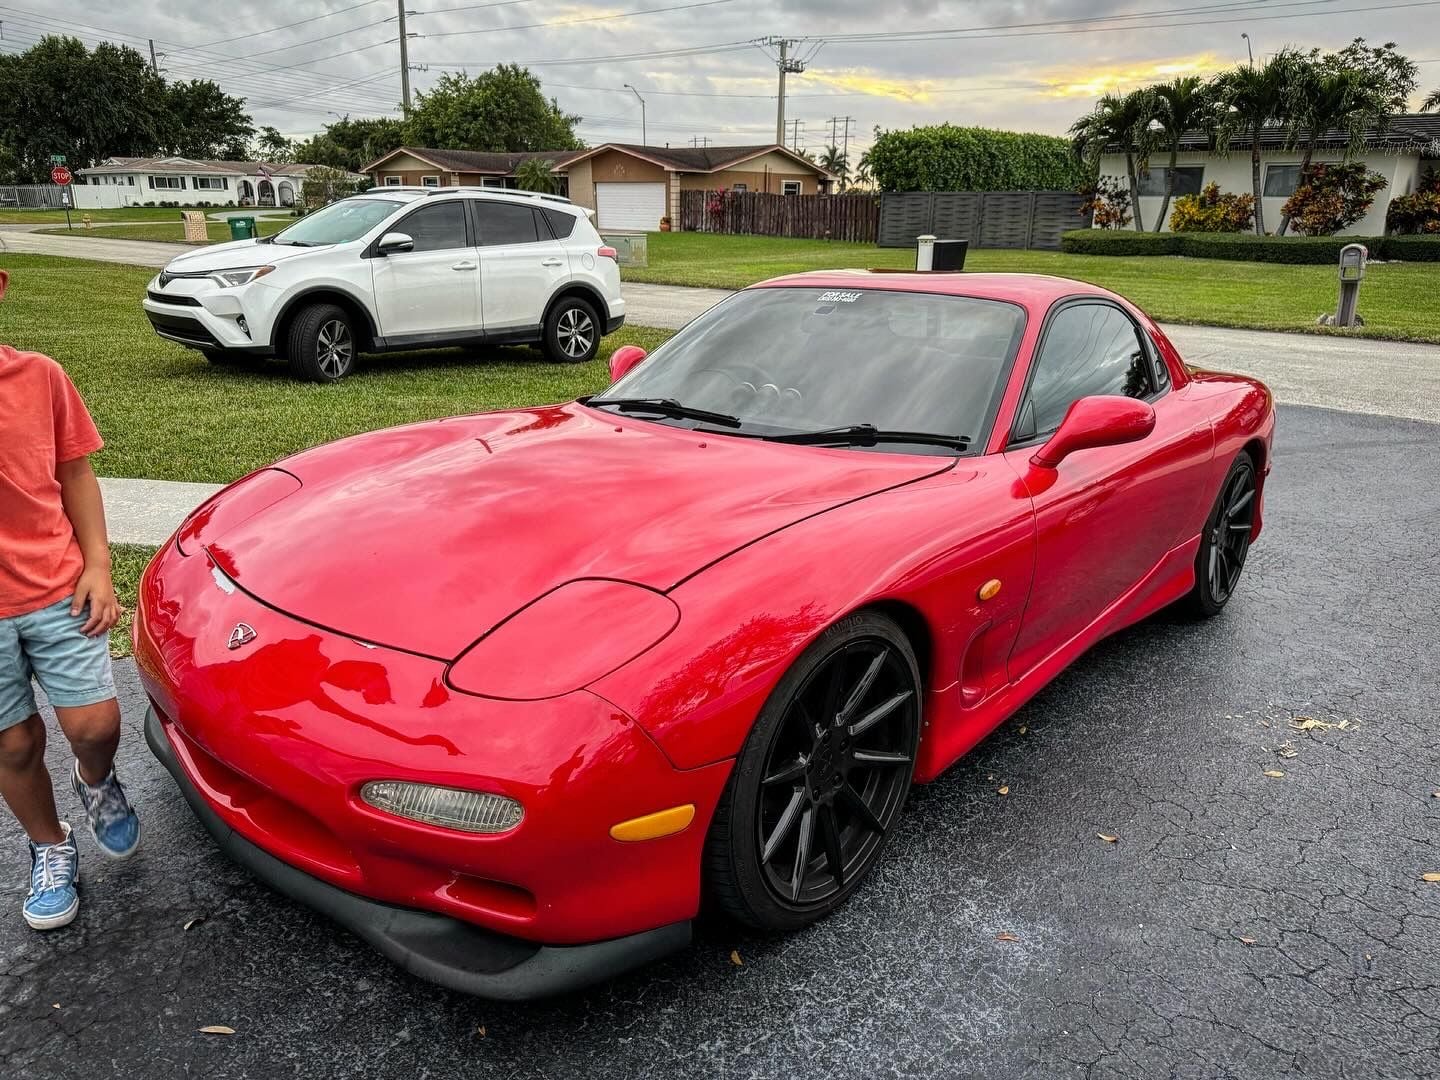 Exterior Body Parts - FD3S side skirts/mud guard - Used - 1992 to 2002 Mazda RX-7 - Miami, FL 33172, United States